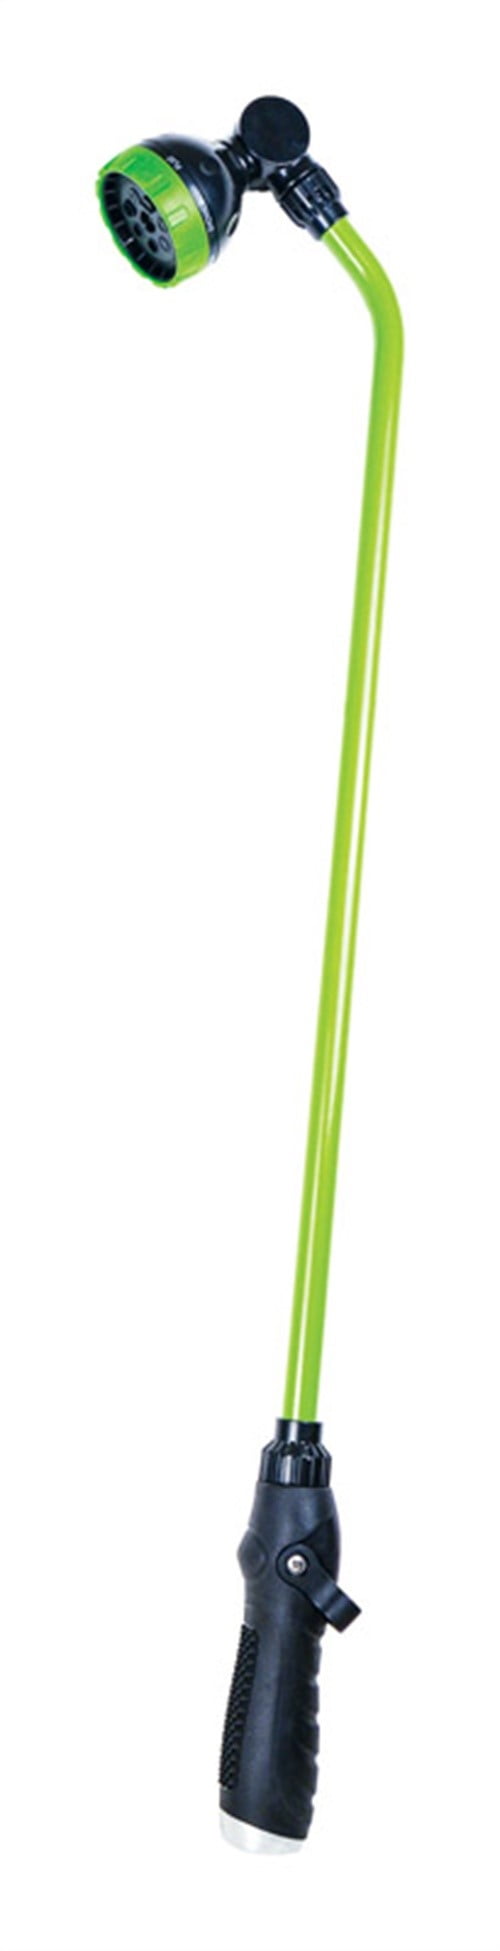 Rugg 7690787 Lime Green 7 Pattern Shower Metal Watering Wand